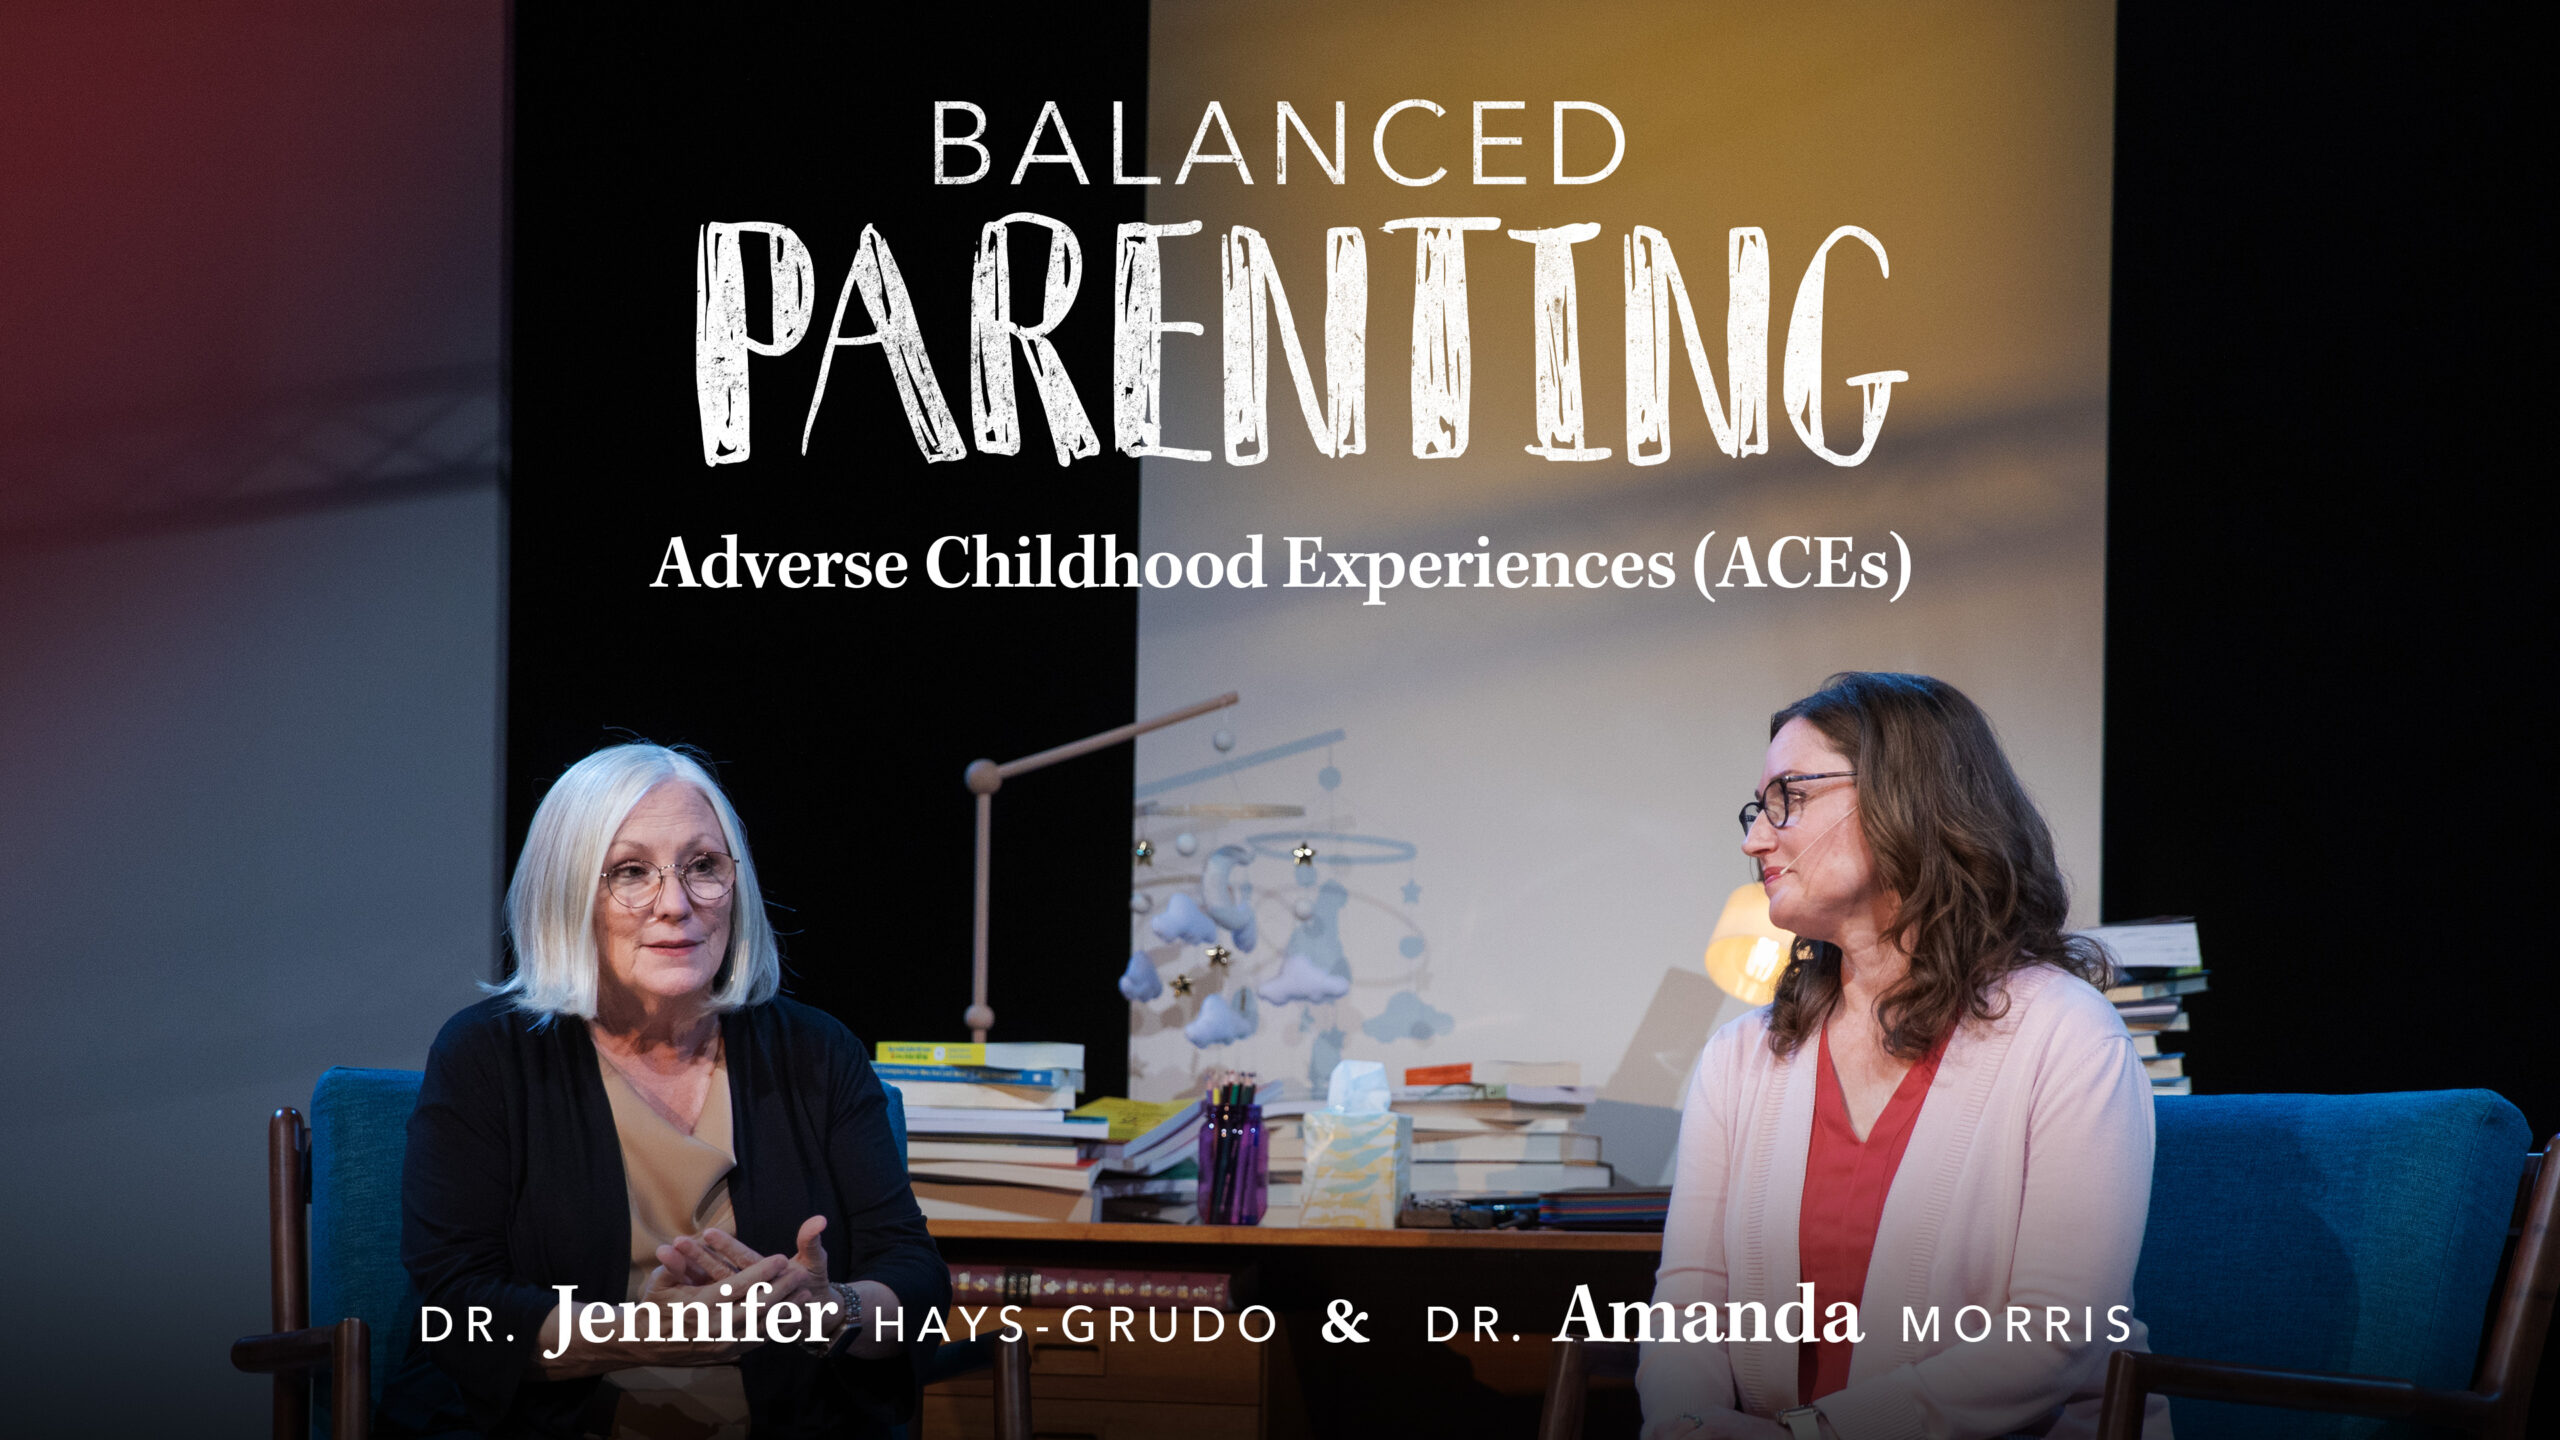 Episode One: Adverse Childhood Experiences (ACEs)